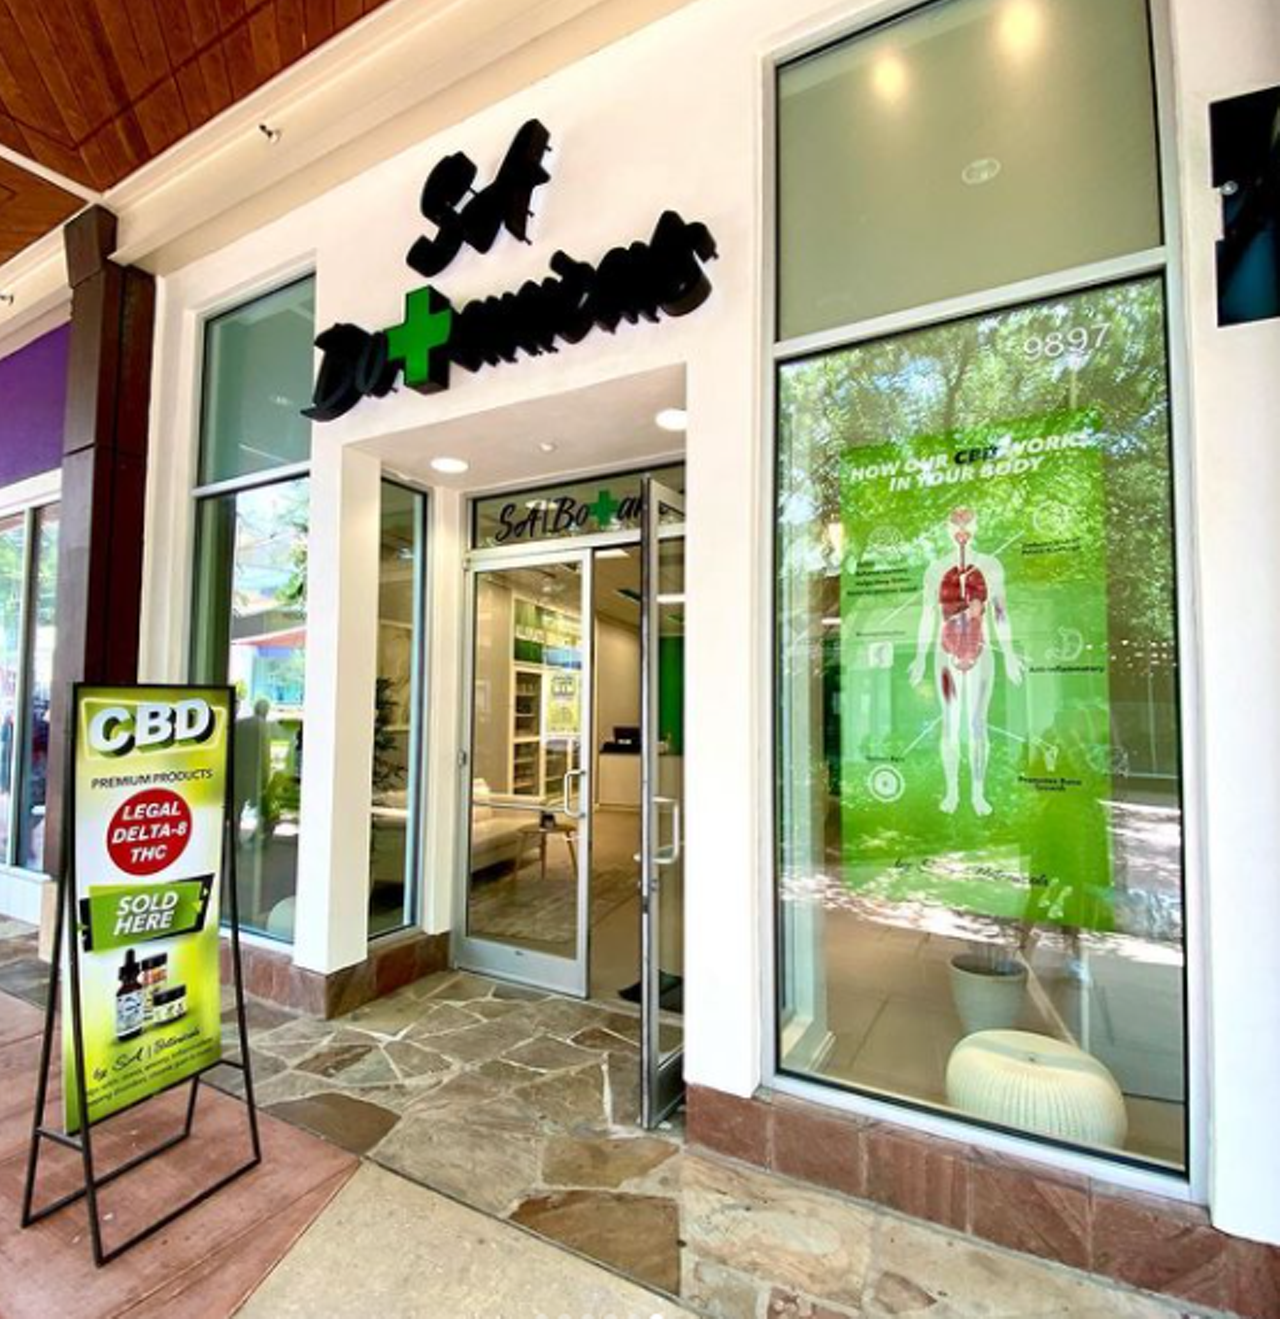 SA Botanicals
Multiple locations, (888) 733-4493, sabotanicals.com
With shops across San Antonio, this chain offers locally-produced CBD products for you (and your pets) regardless of where you are in the city.
Photo via Instagram / sabotanicals